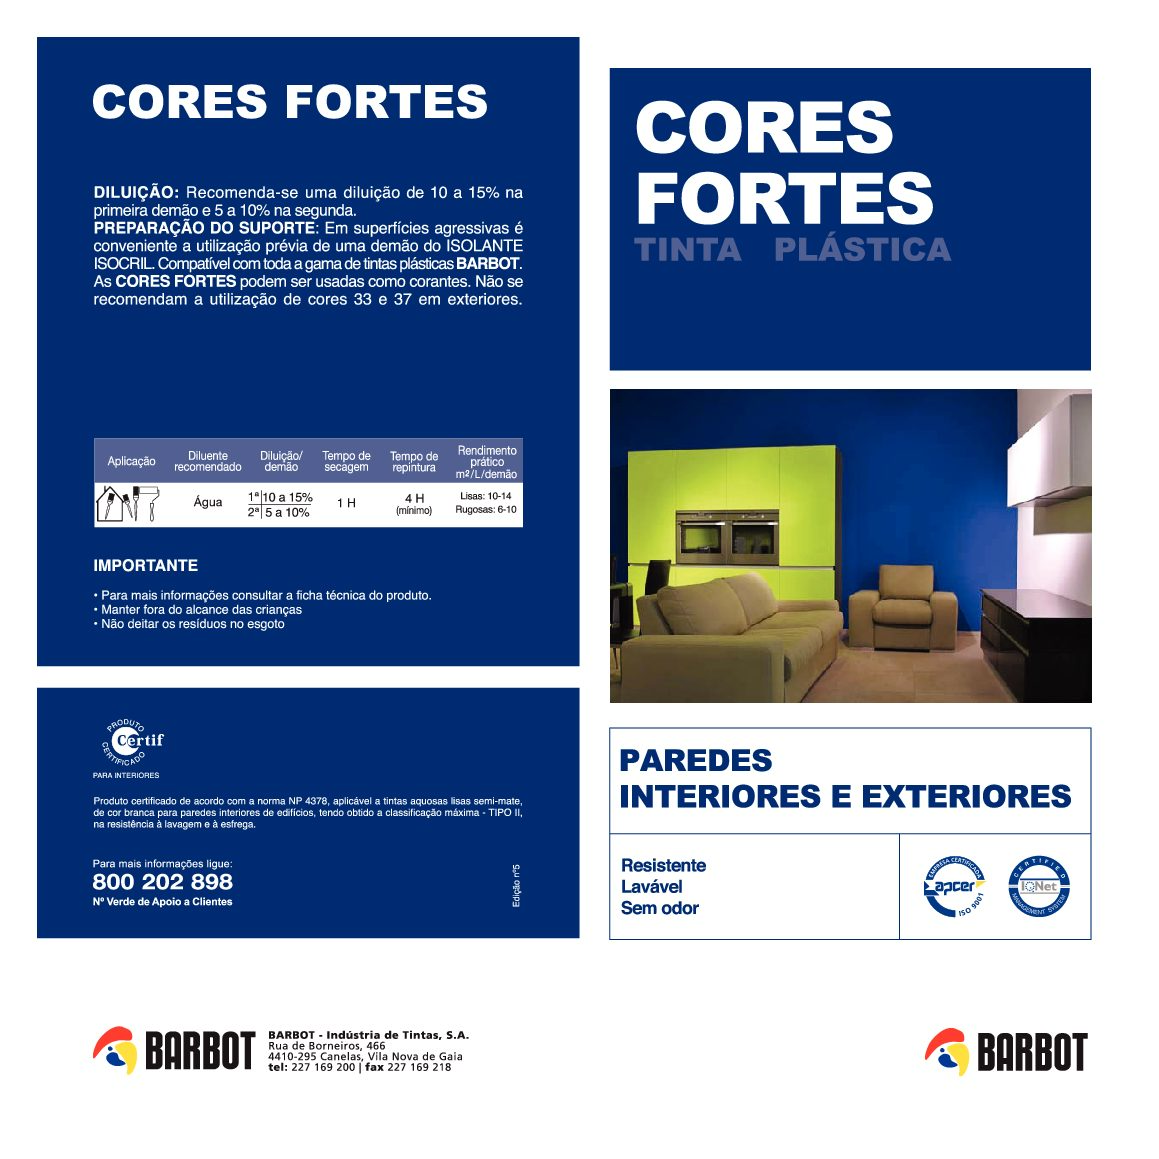 Barbot - Cores Fortes